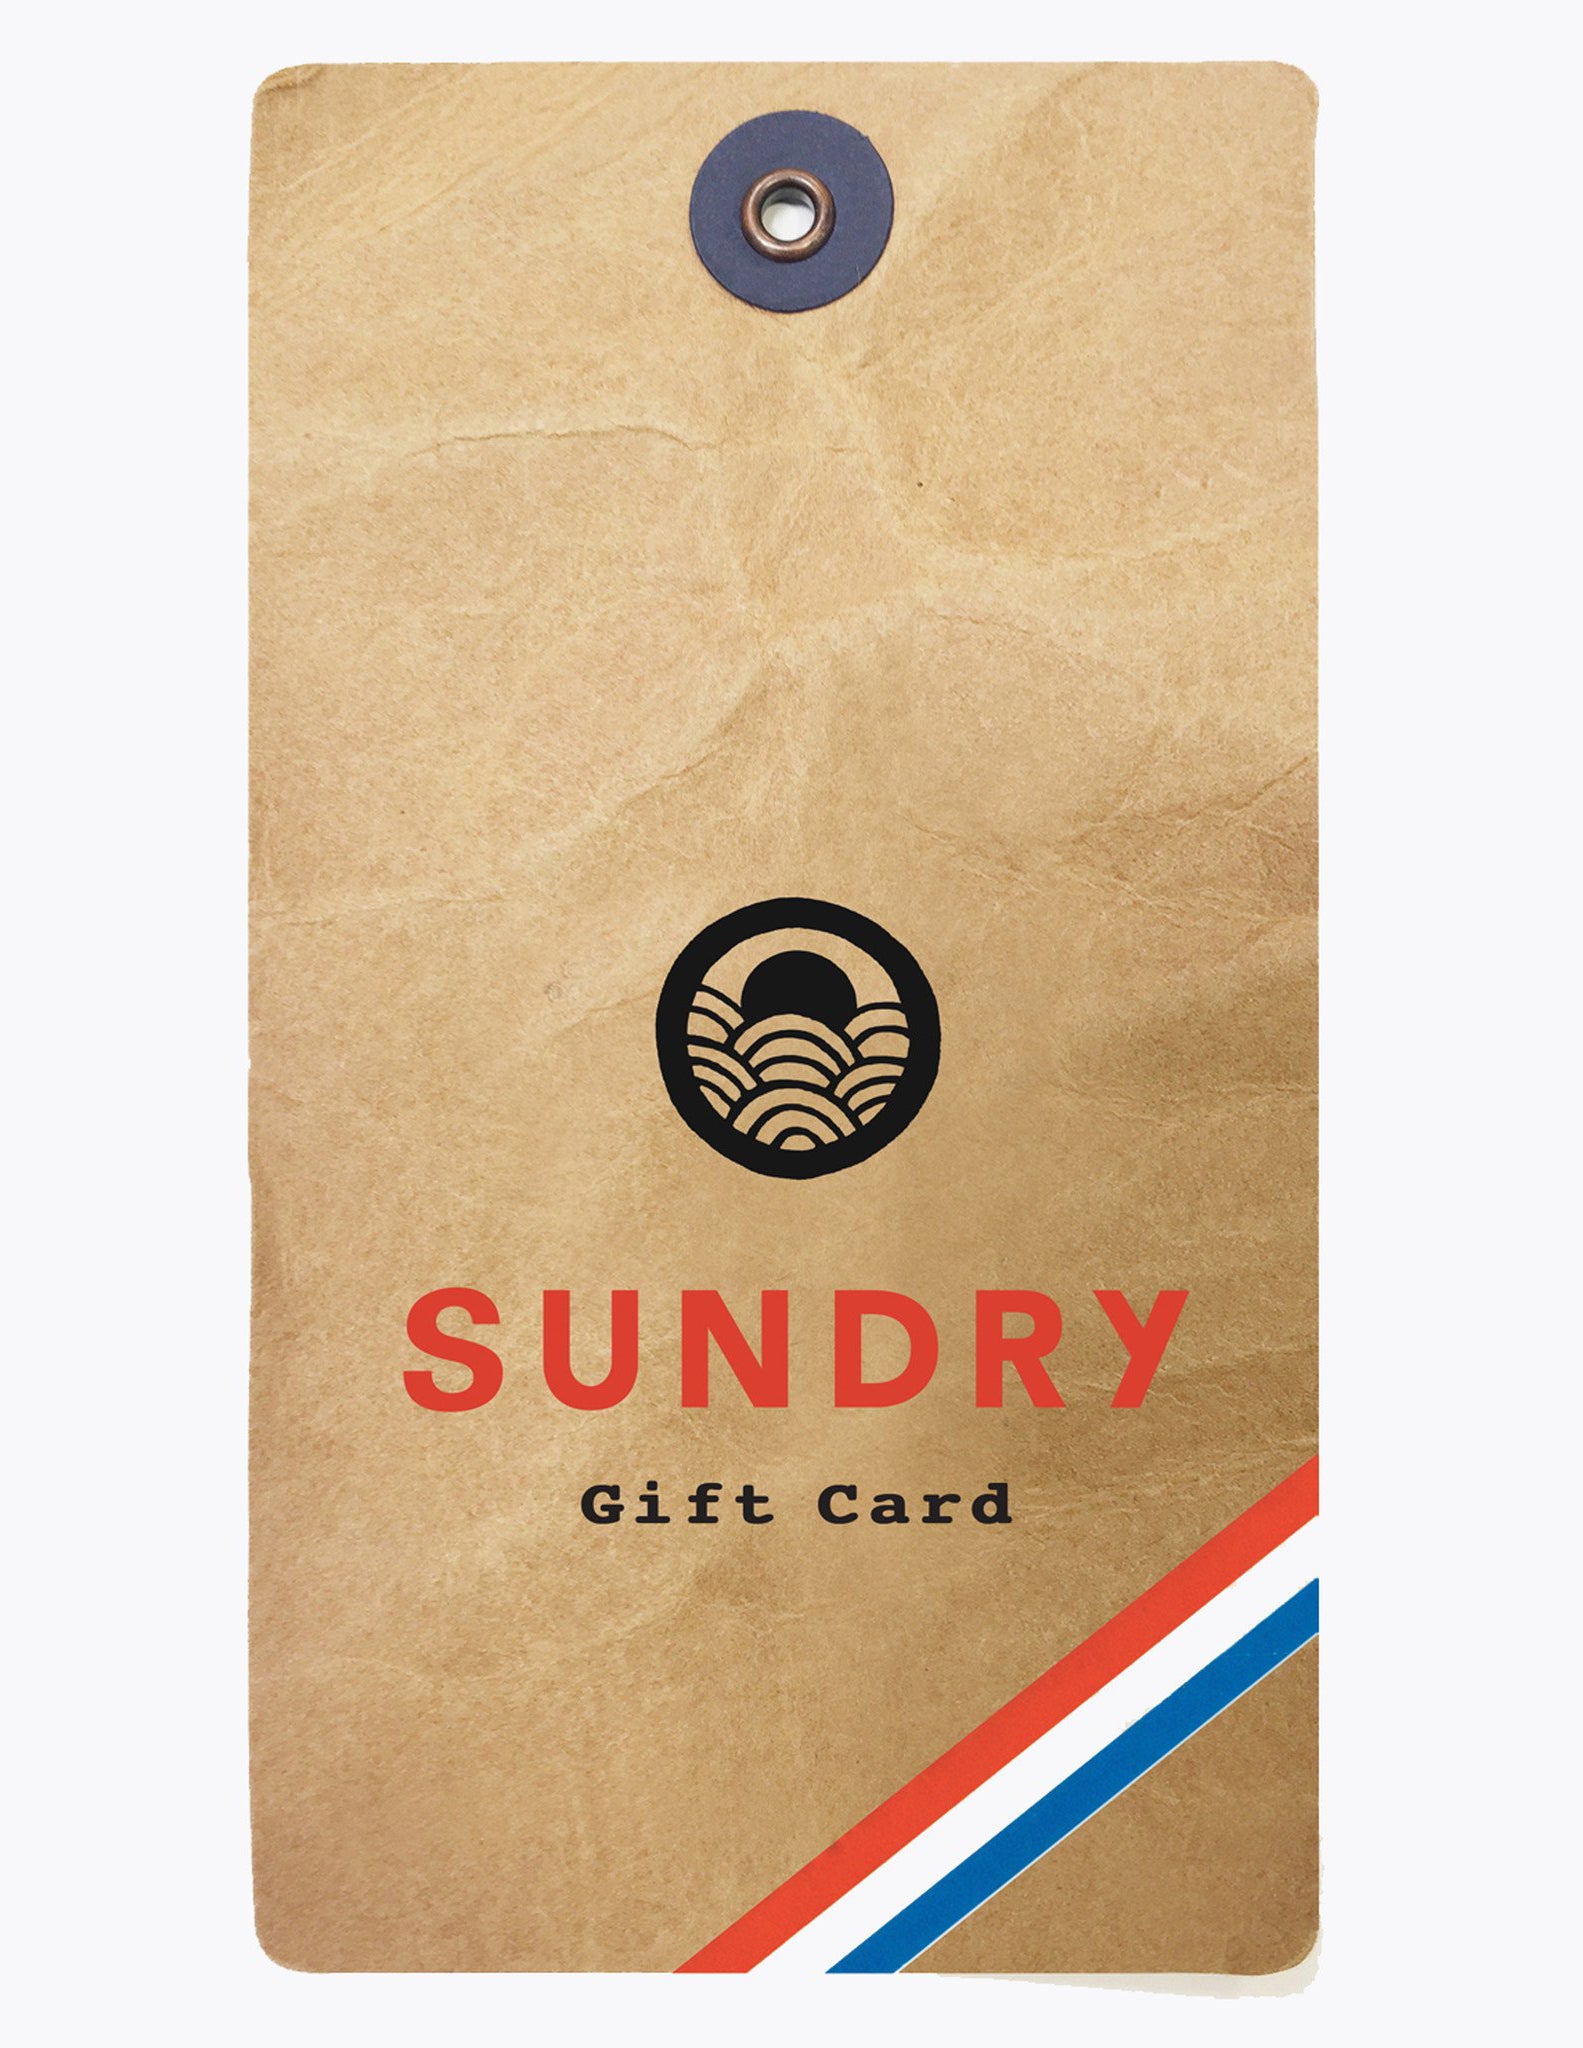 Women's High End Fashion Clothing Gift Card - Sundry